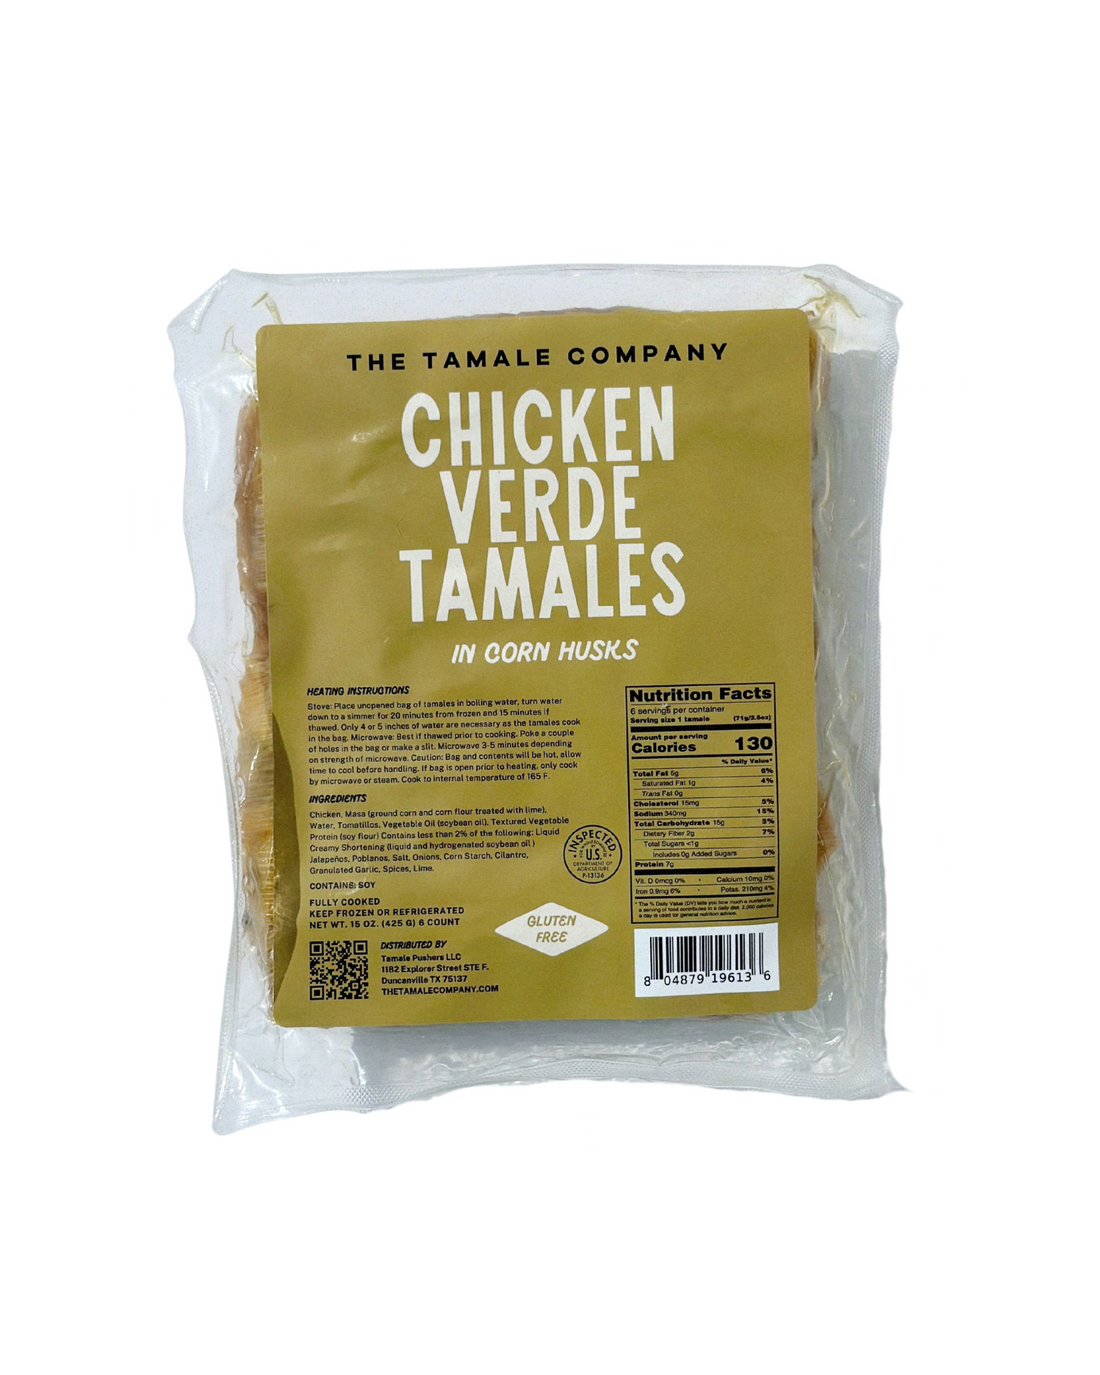 Chicken Verde Tamales - The Tamale Company